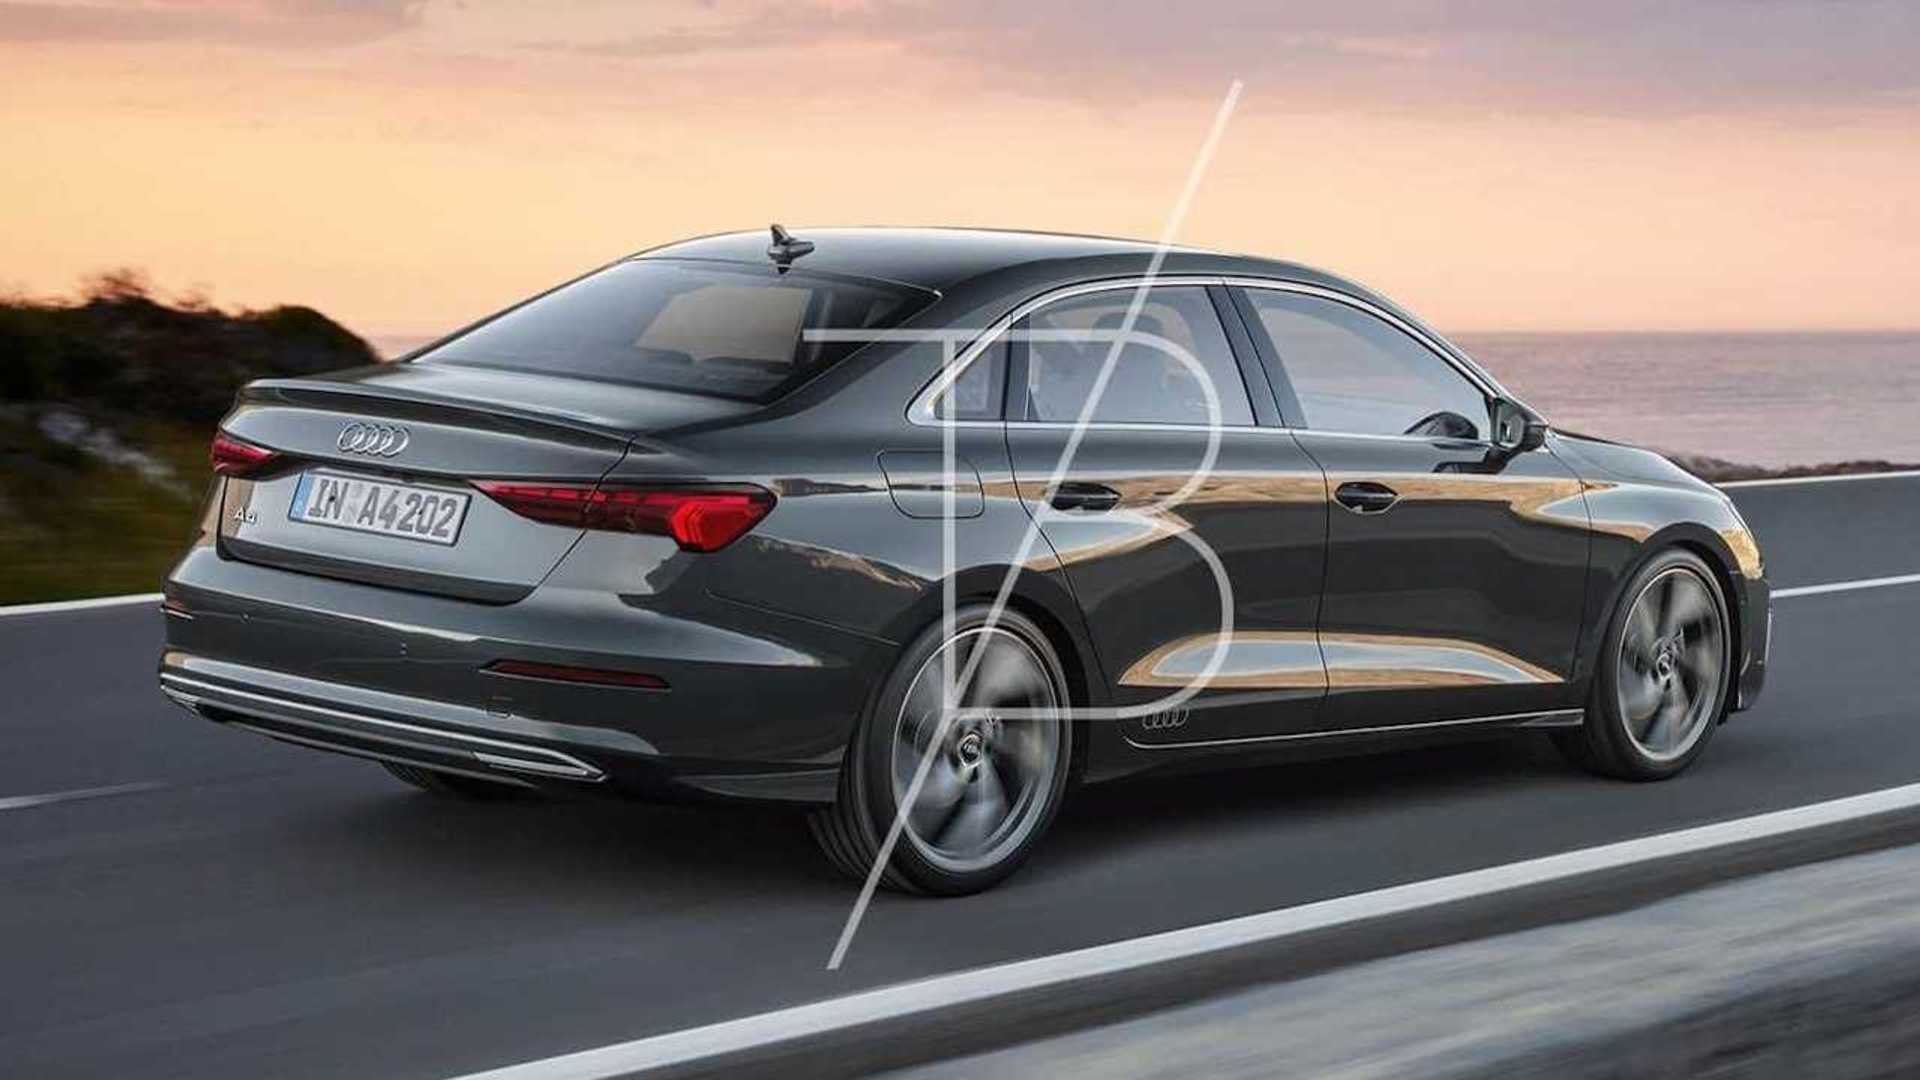 2022 Audi A4 Renderings Preview An Evolutionary Design Update